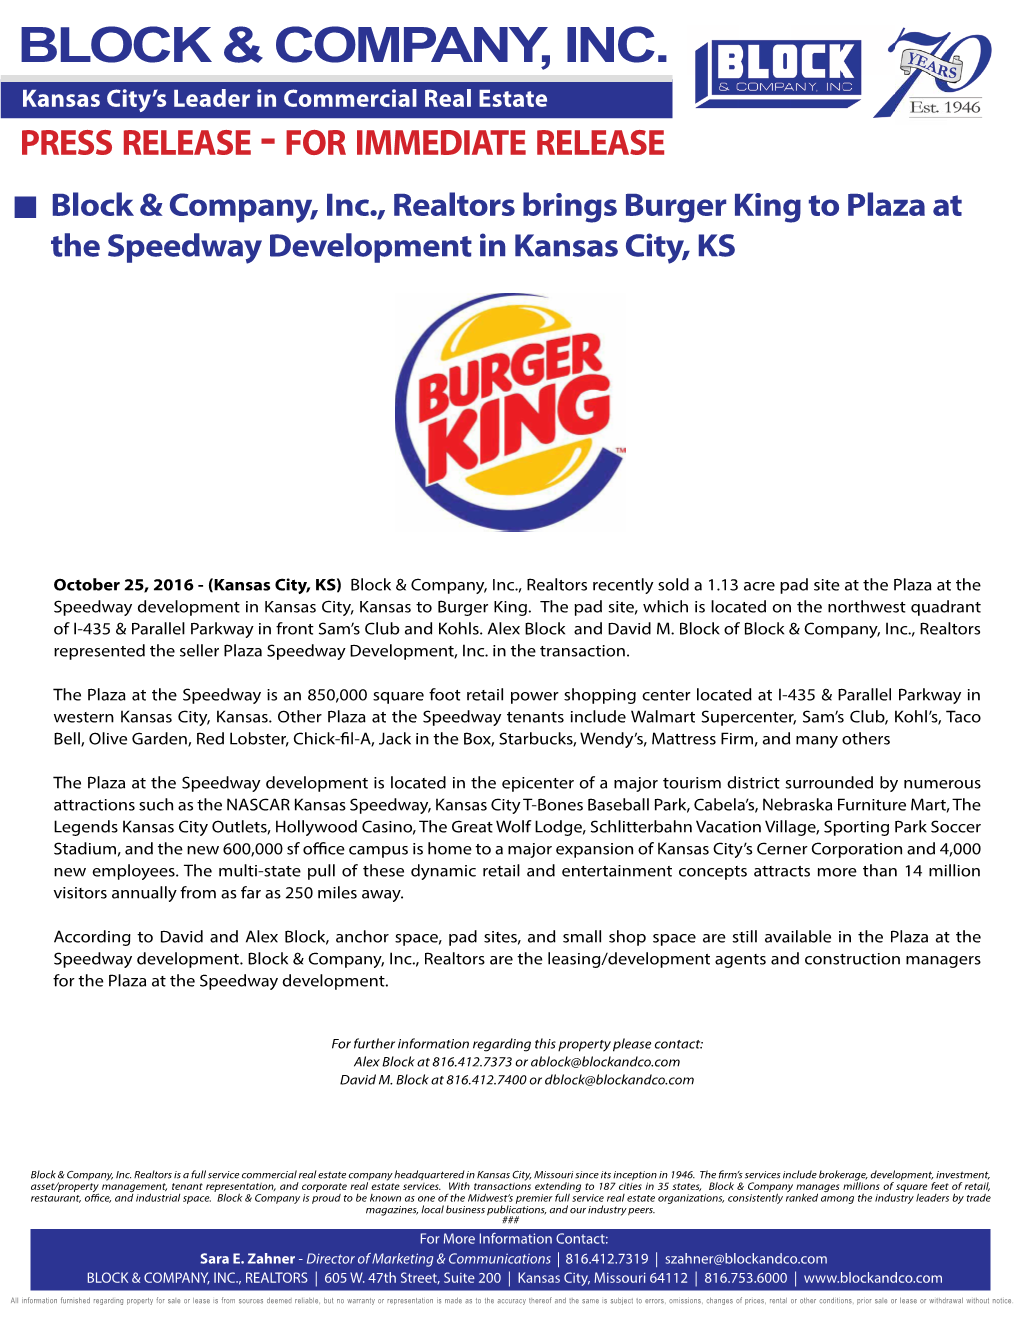 PRESS RELEASE - for IMMEDIATE RELEASE Block & Company, Inc., Realtors Brings Burger King to Plaza at the Speedway Development in Kansas City, KS